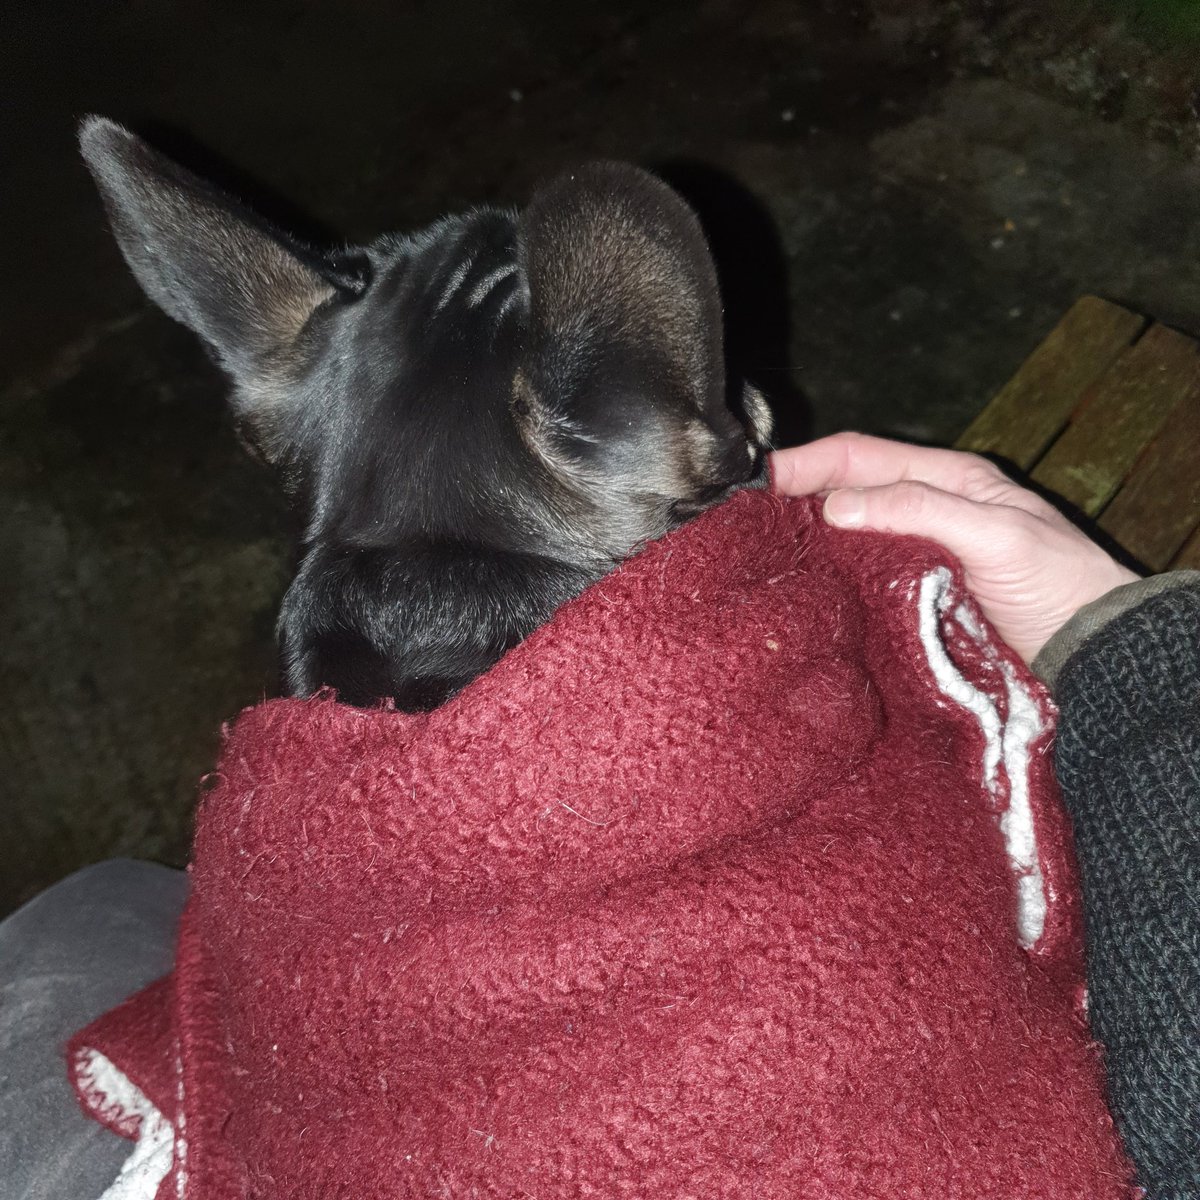 My exclusive Xmas #pigintheblanket , pic taken at230am last night 🌙 Have a Great Christmas 🎄 #Everyone 🎅 🎁 🦌 #MerryChristmas2023 #Frenchbulldog Floki💪#dogsontwitter @dogandpuplovers @dog_rates @DogsAdorble